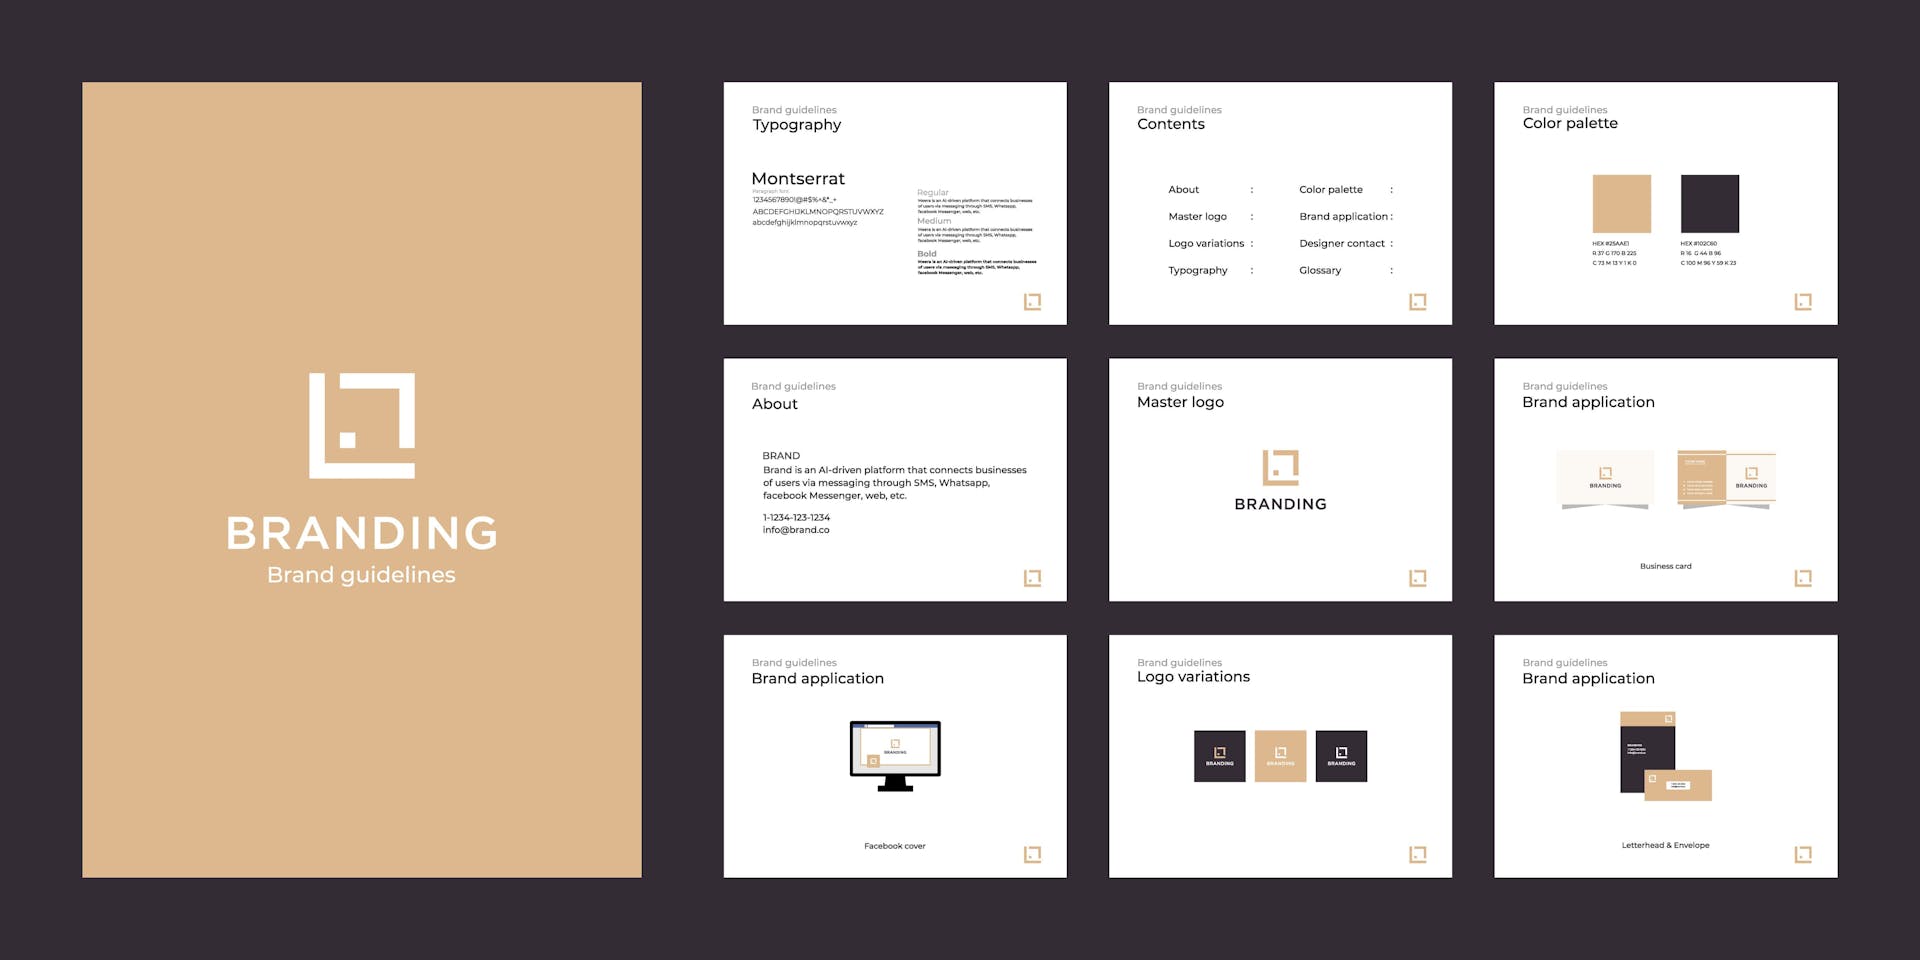 Images of branding guideline manual